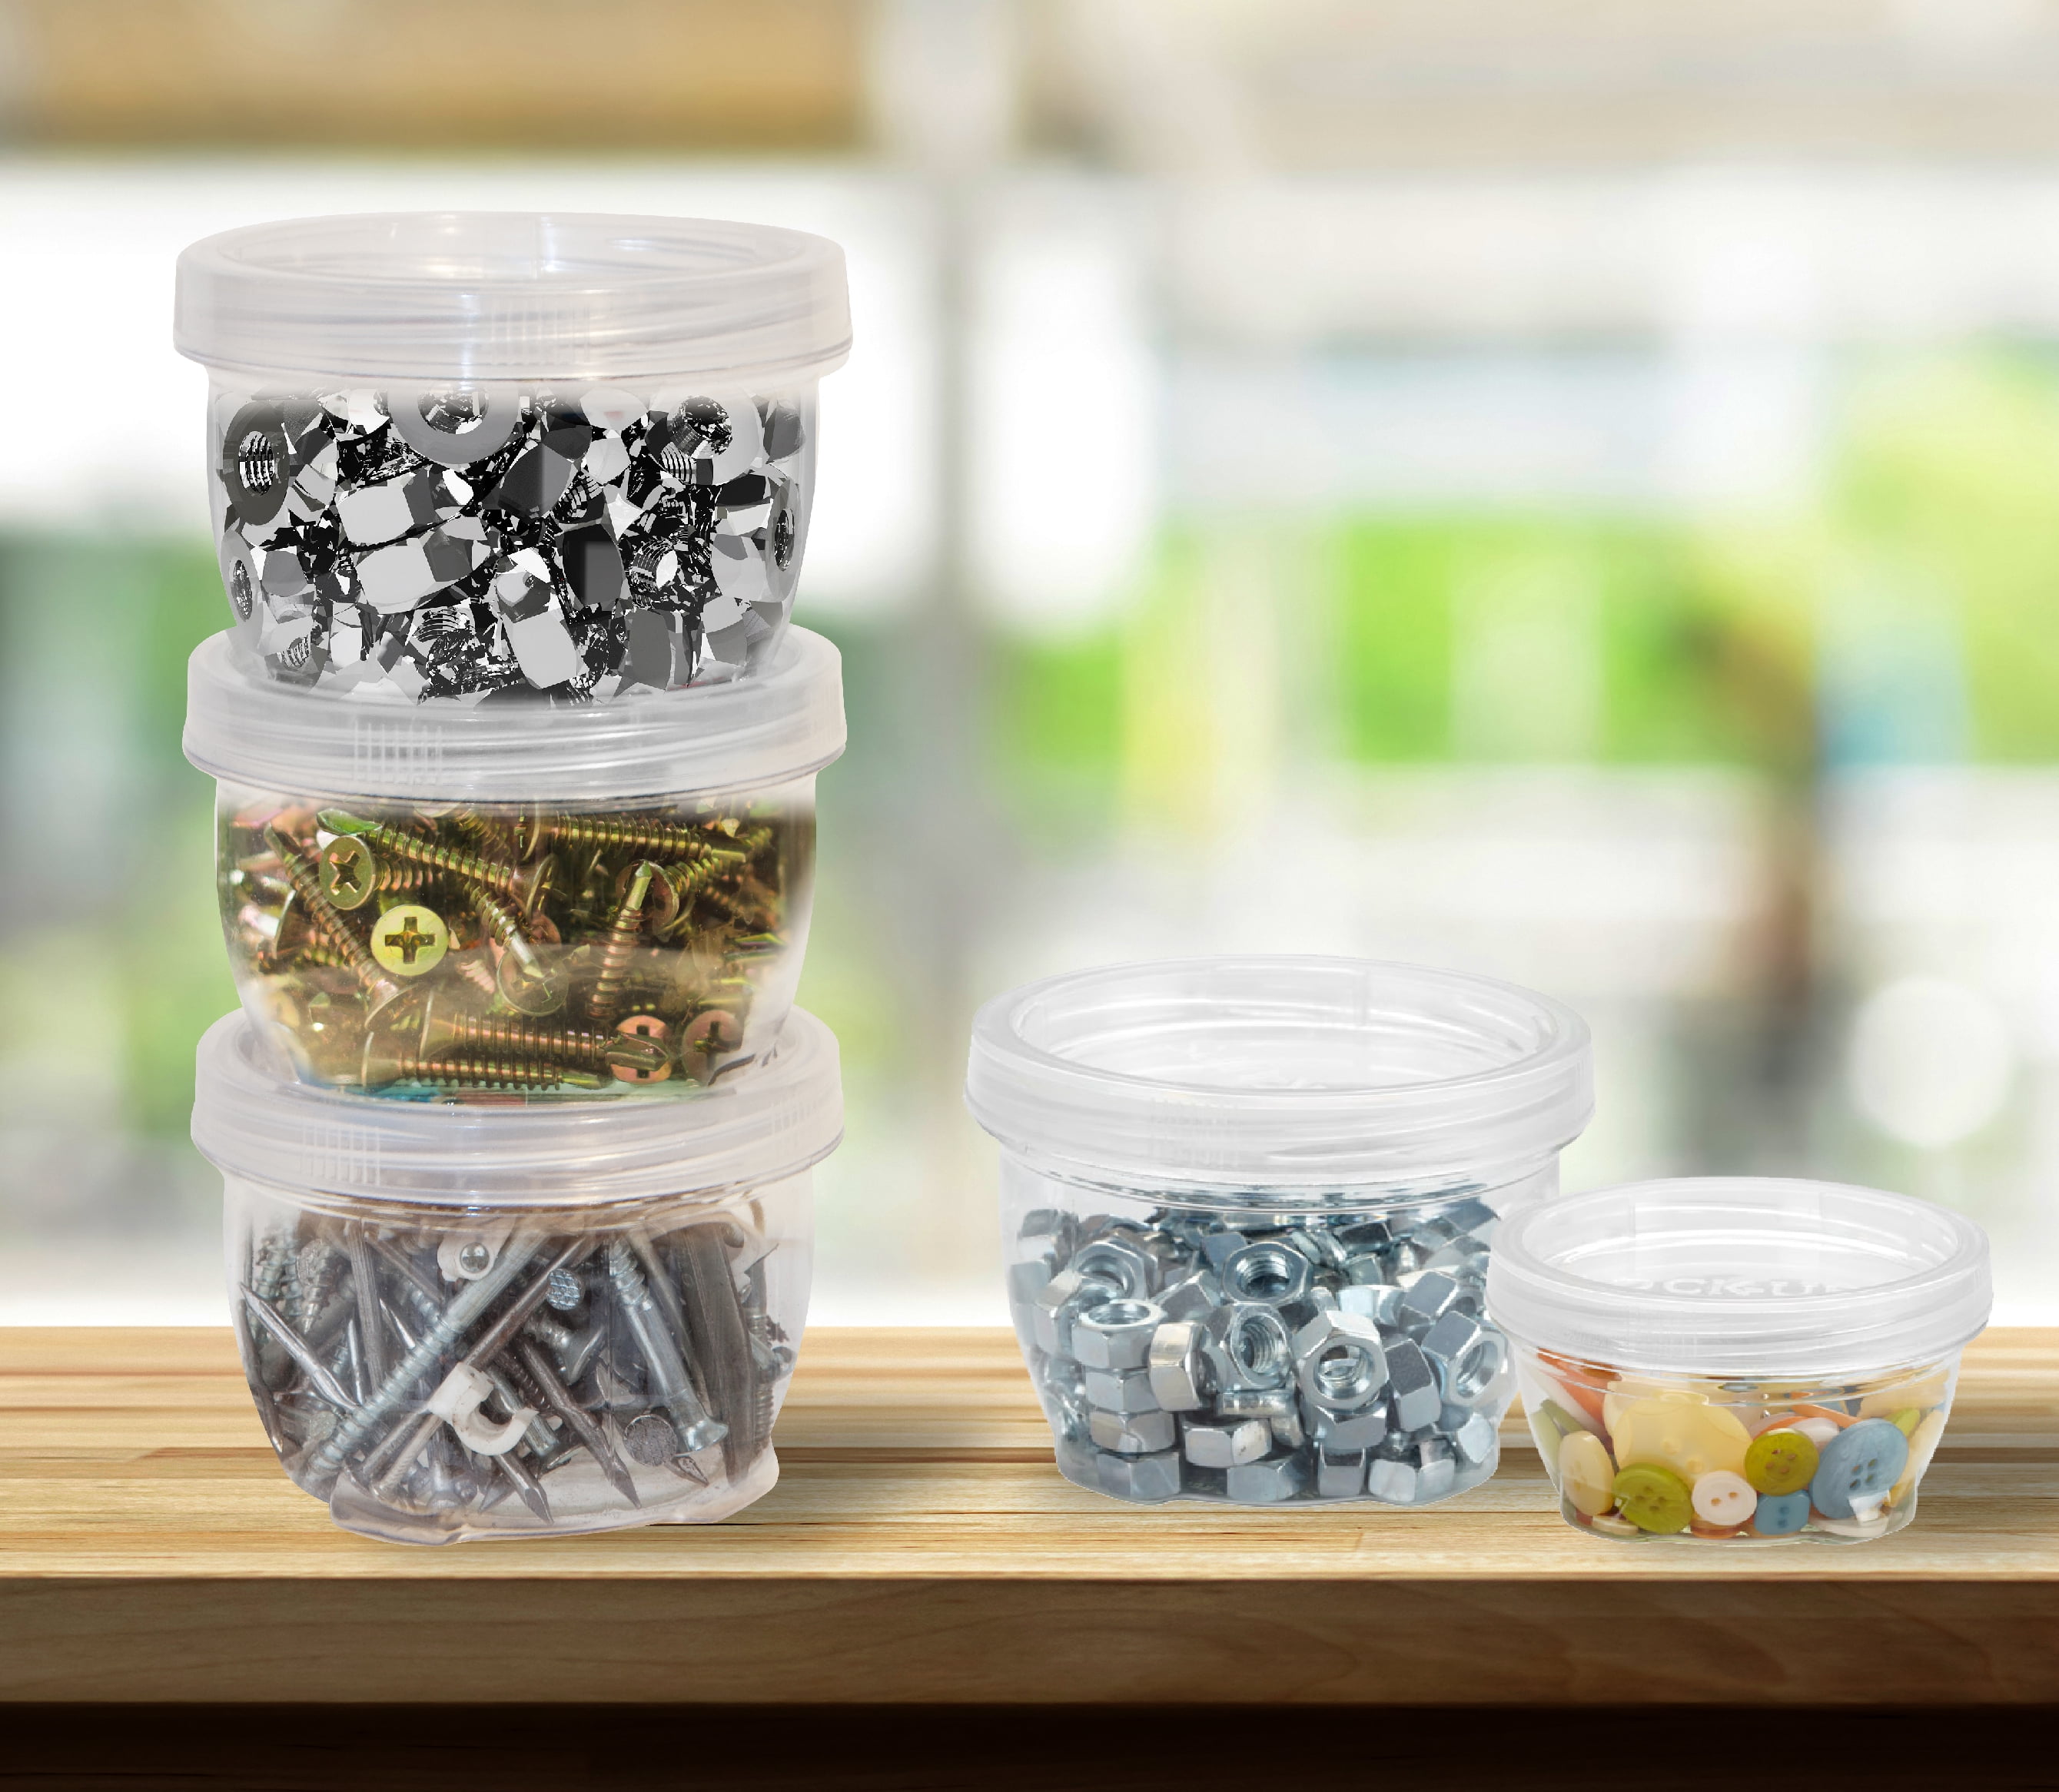 UEG Club Food Storage Containers Plastic Soup Deli Containers with Lids (16oz, 48 Count), Clear